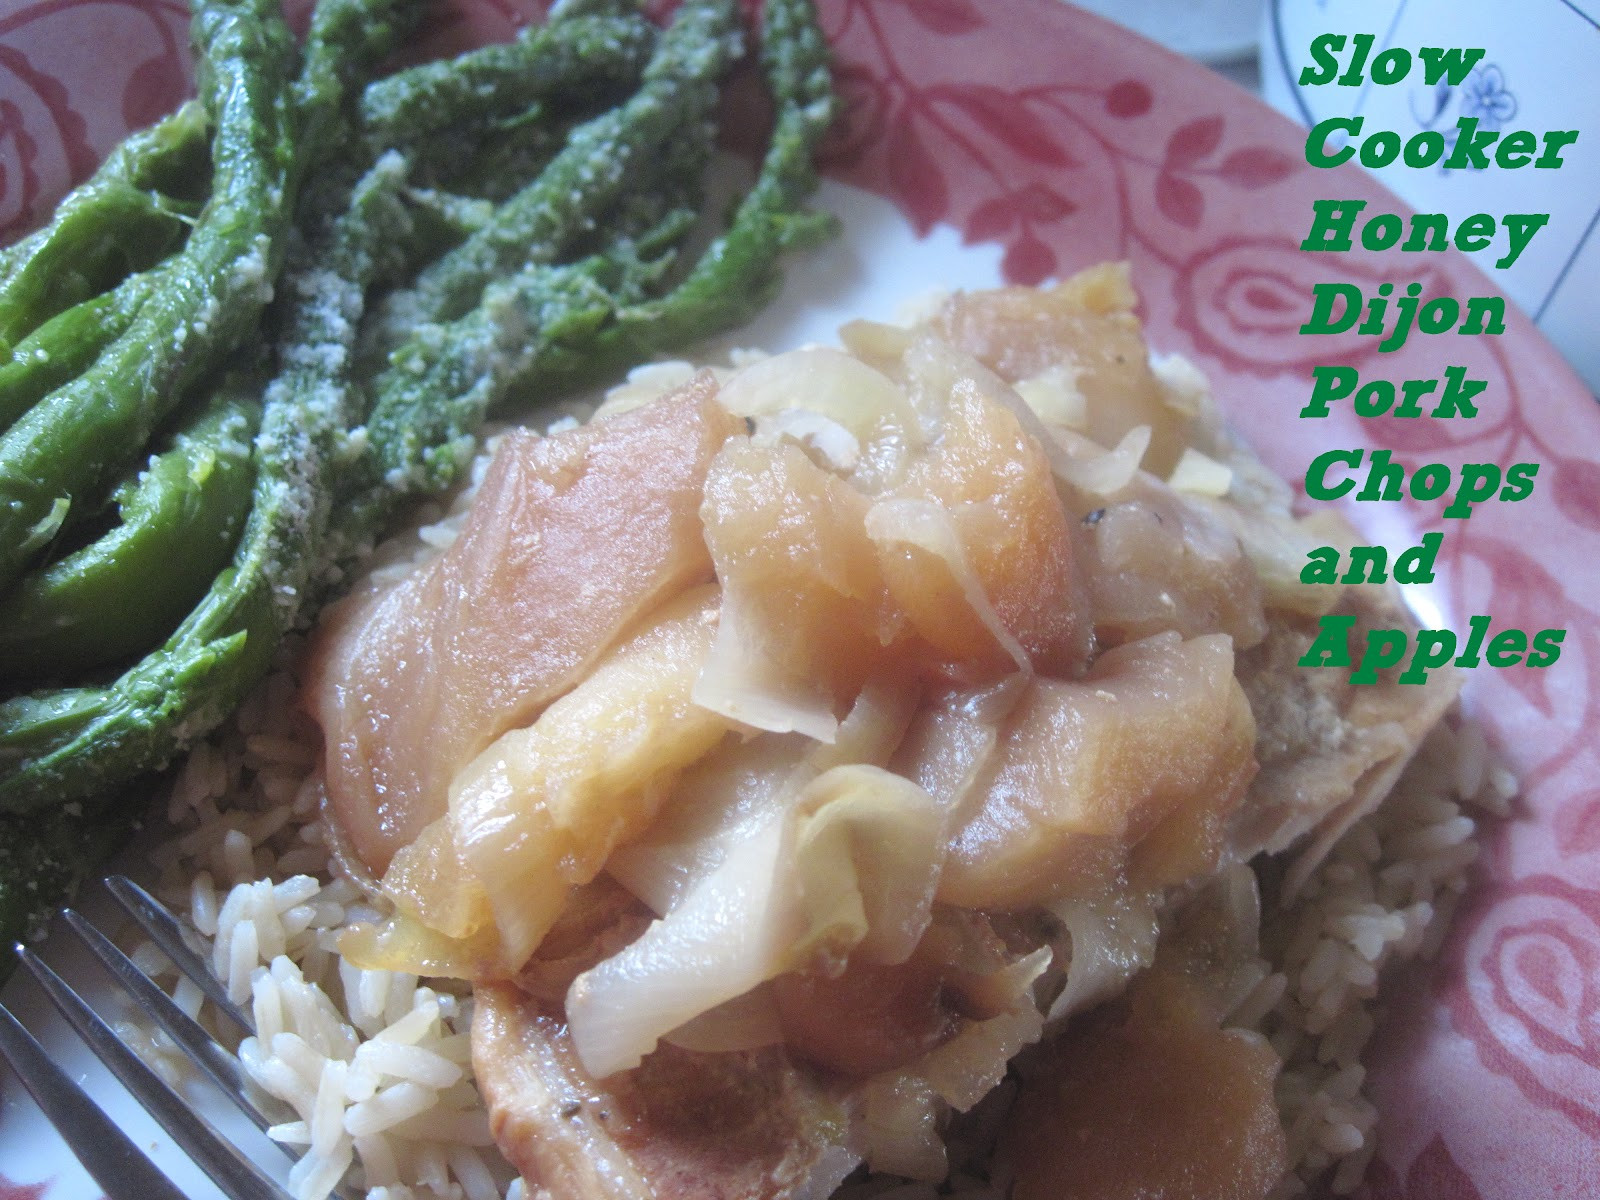 Slow Cooker Pork Chops With Apples
 The Better Baker Slow Cooker Honey Dijon Pork Chops and